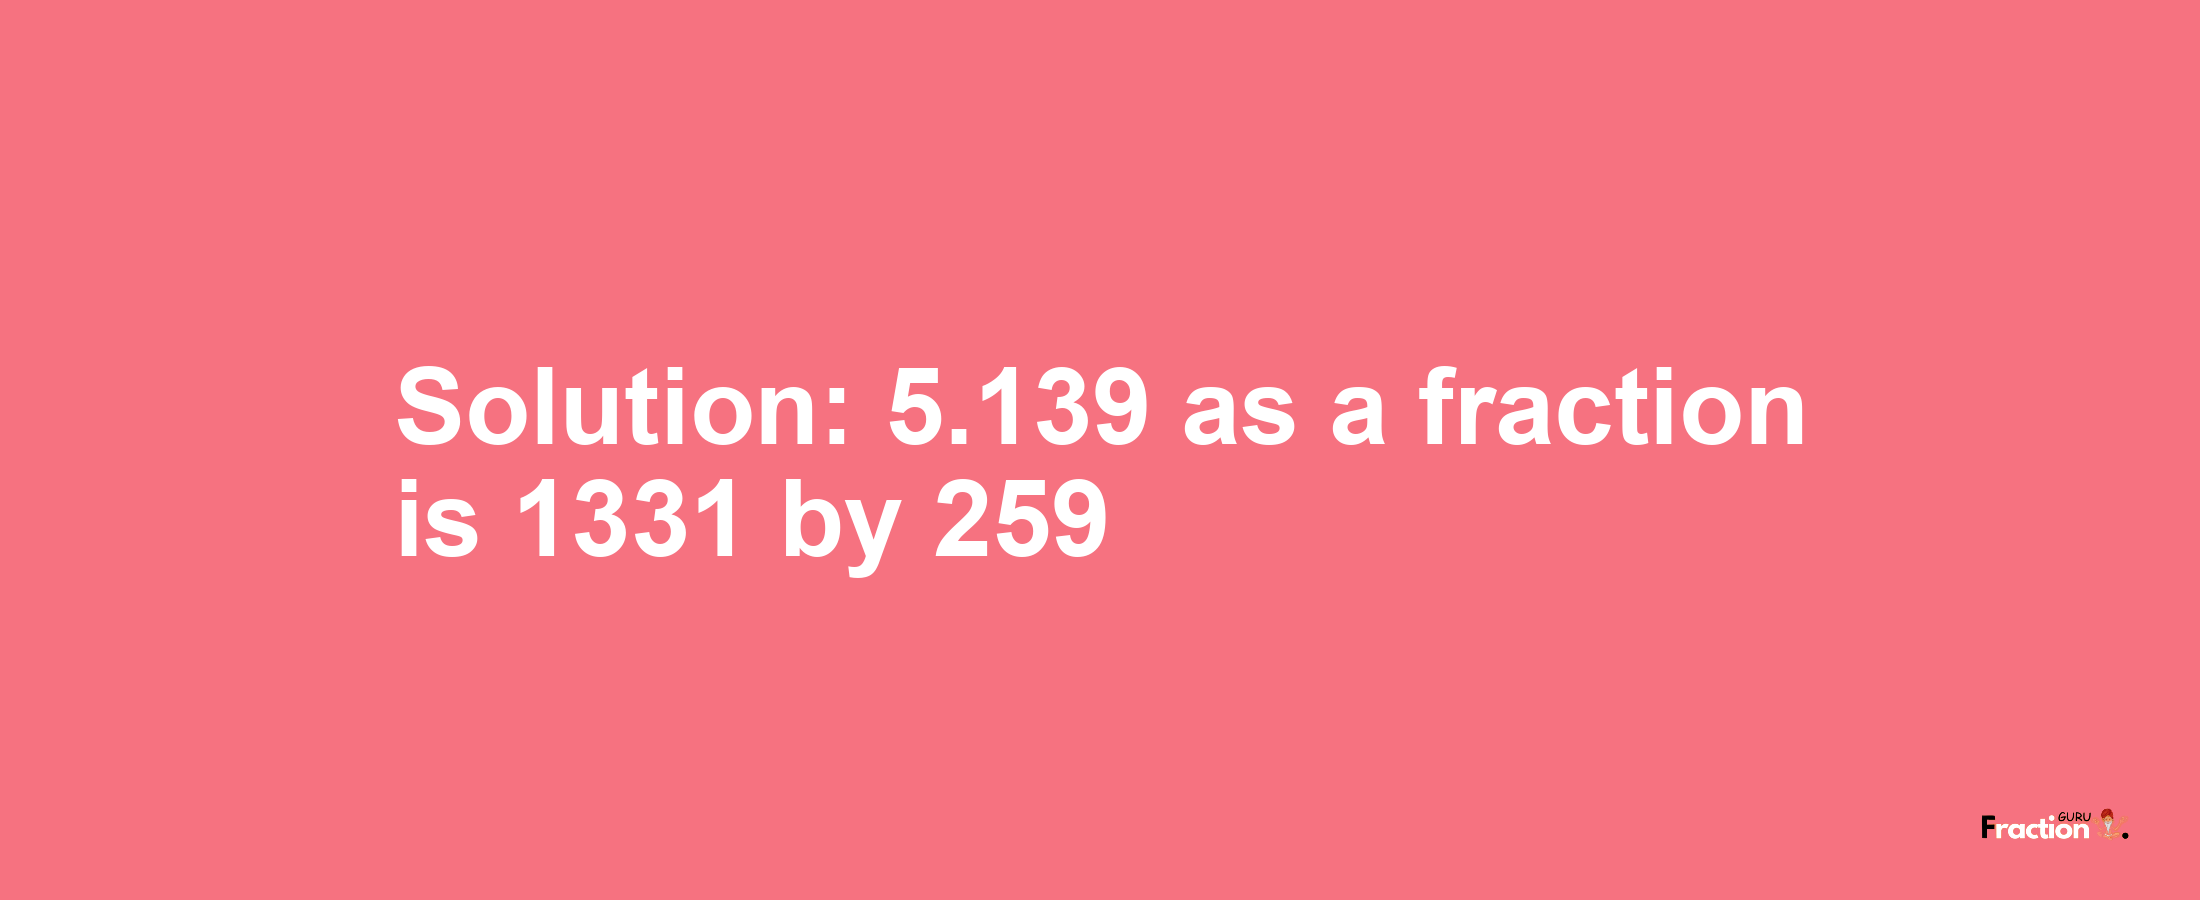 Solution:5.139 as a fraction is 1331/259